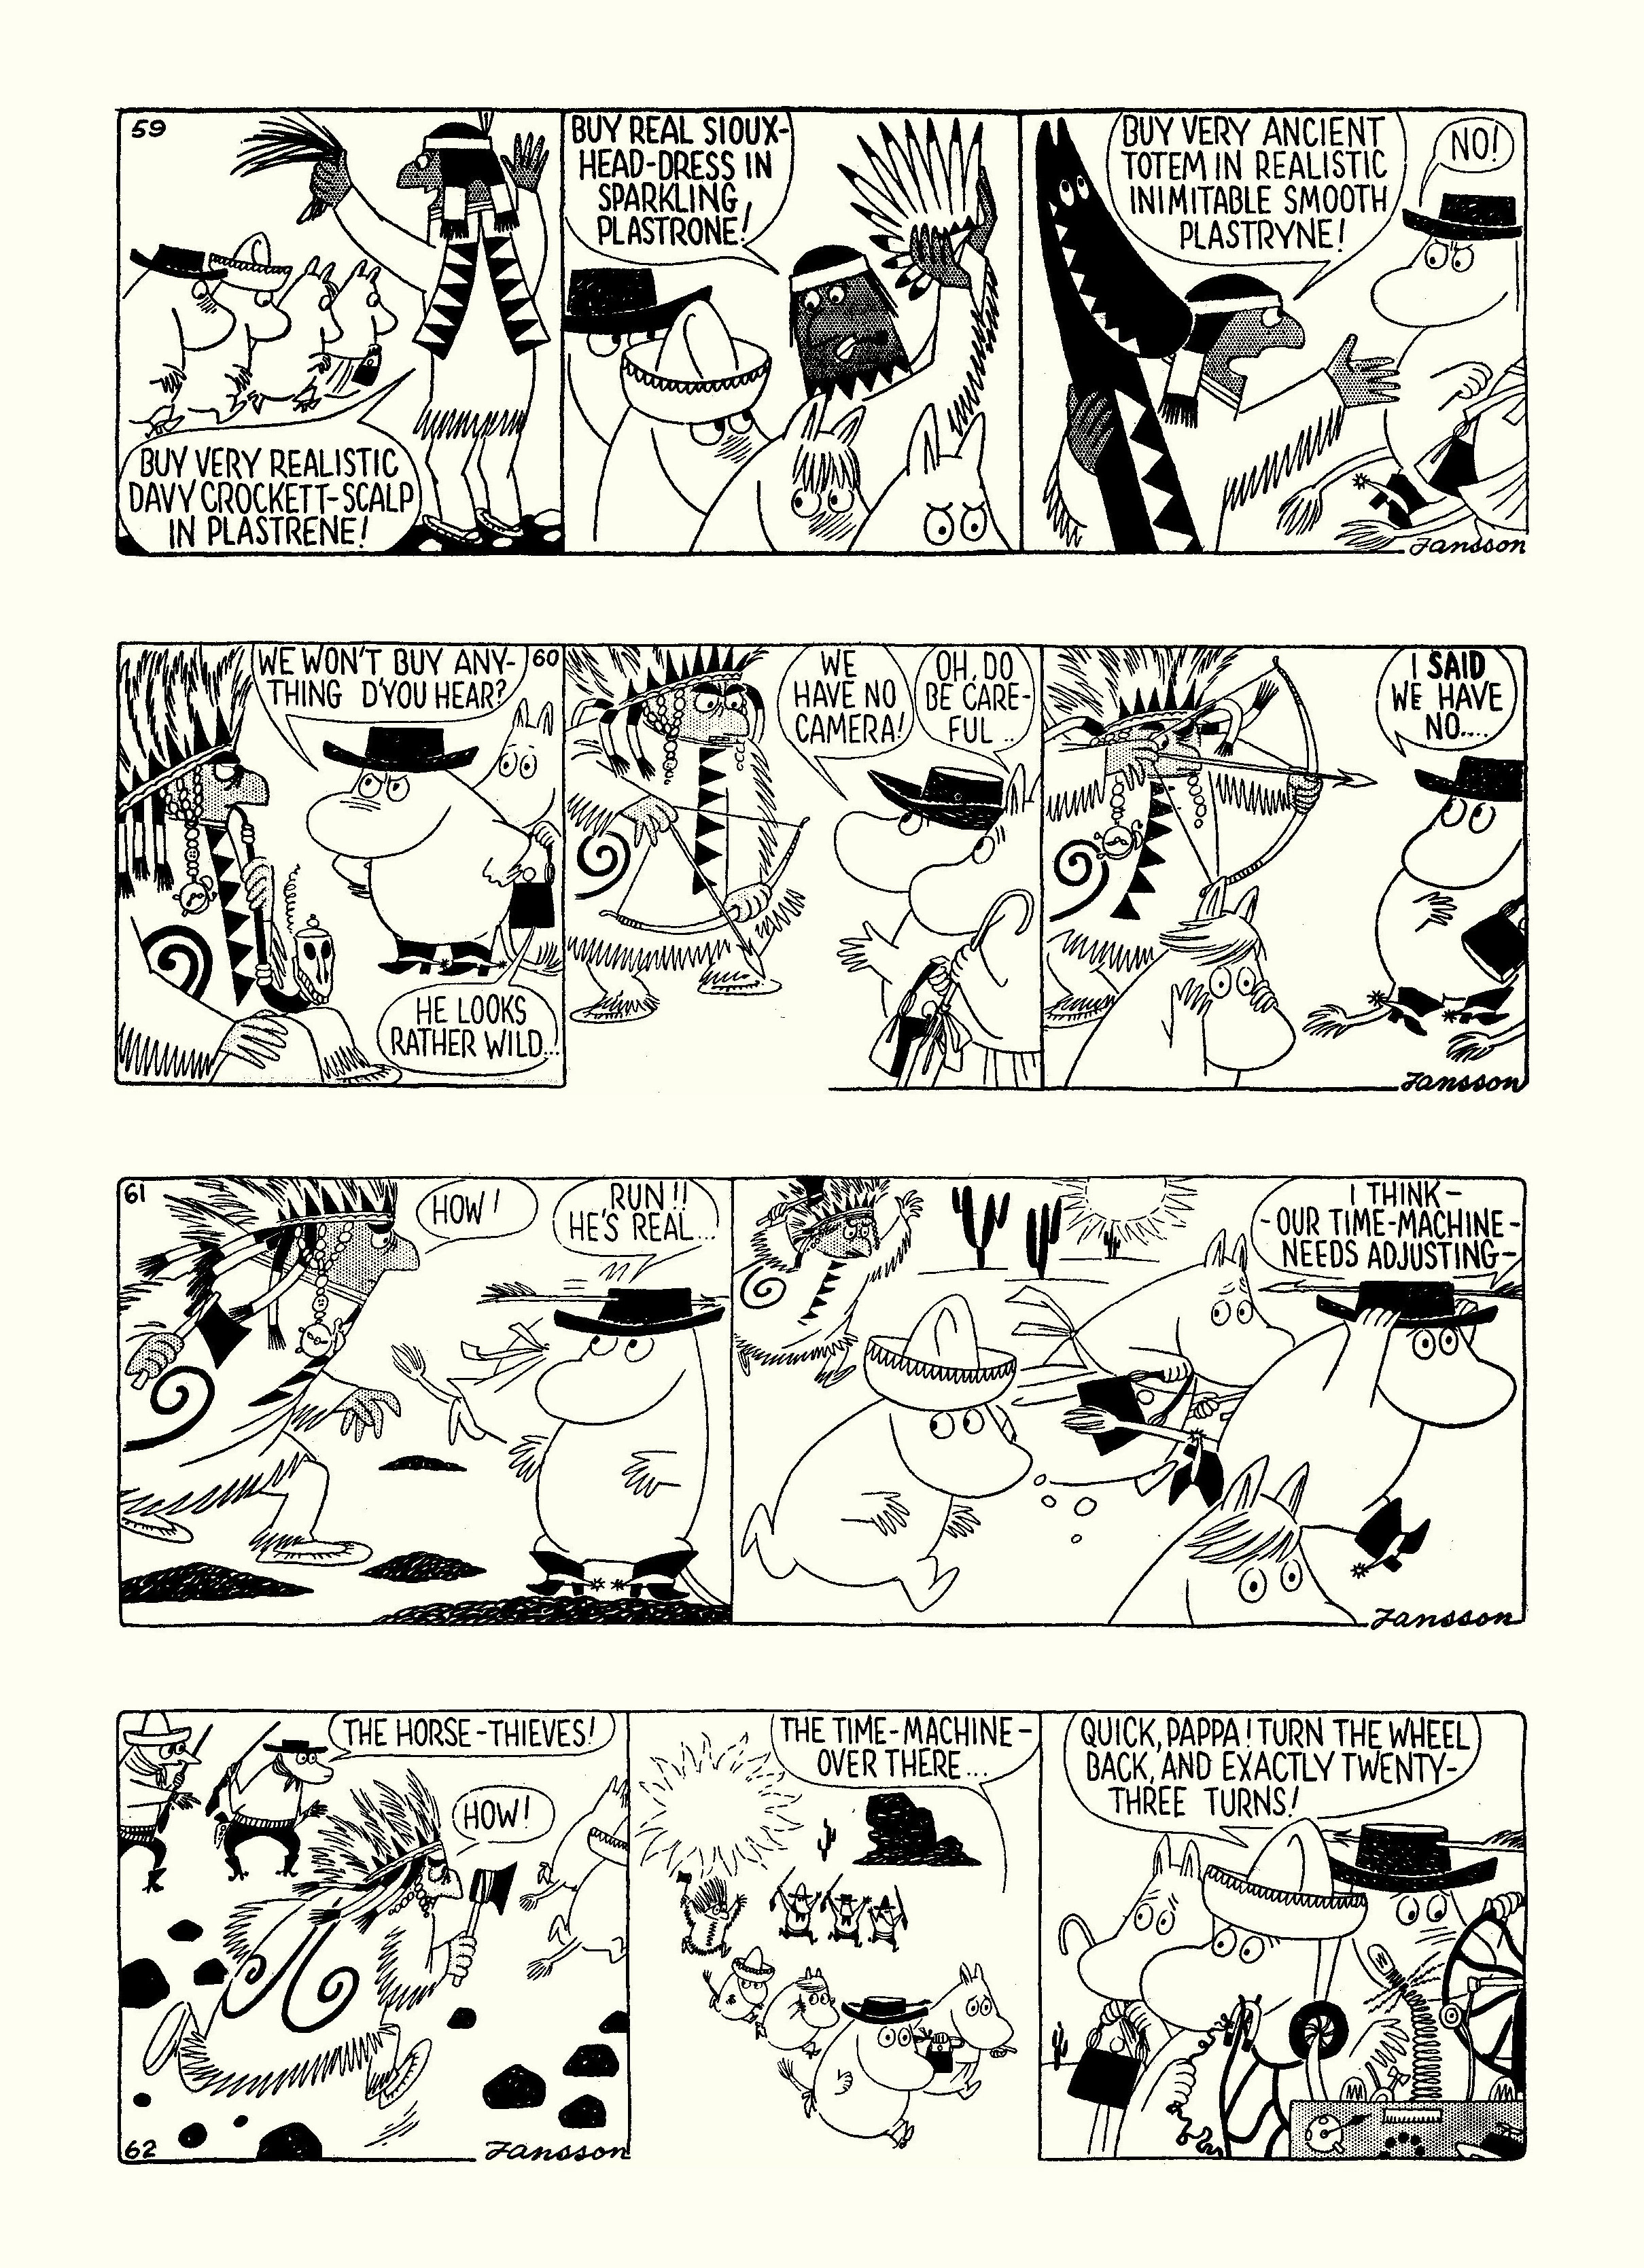 Read online Moomin: The Complete Tove Jansson Comic Strip comic -  Issue # TPB 4 - 21